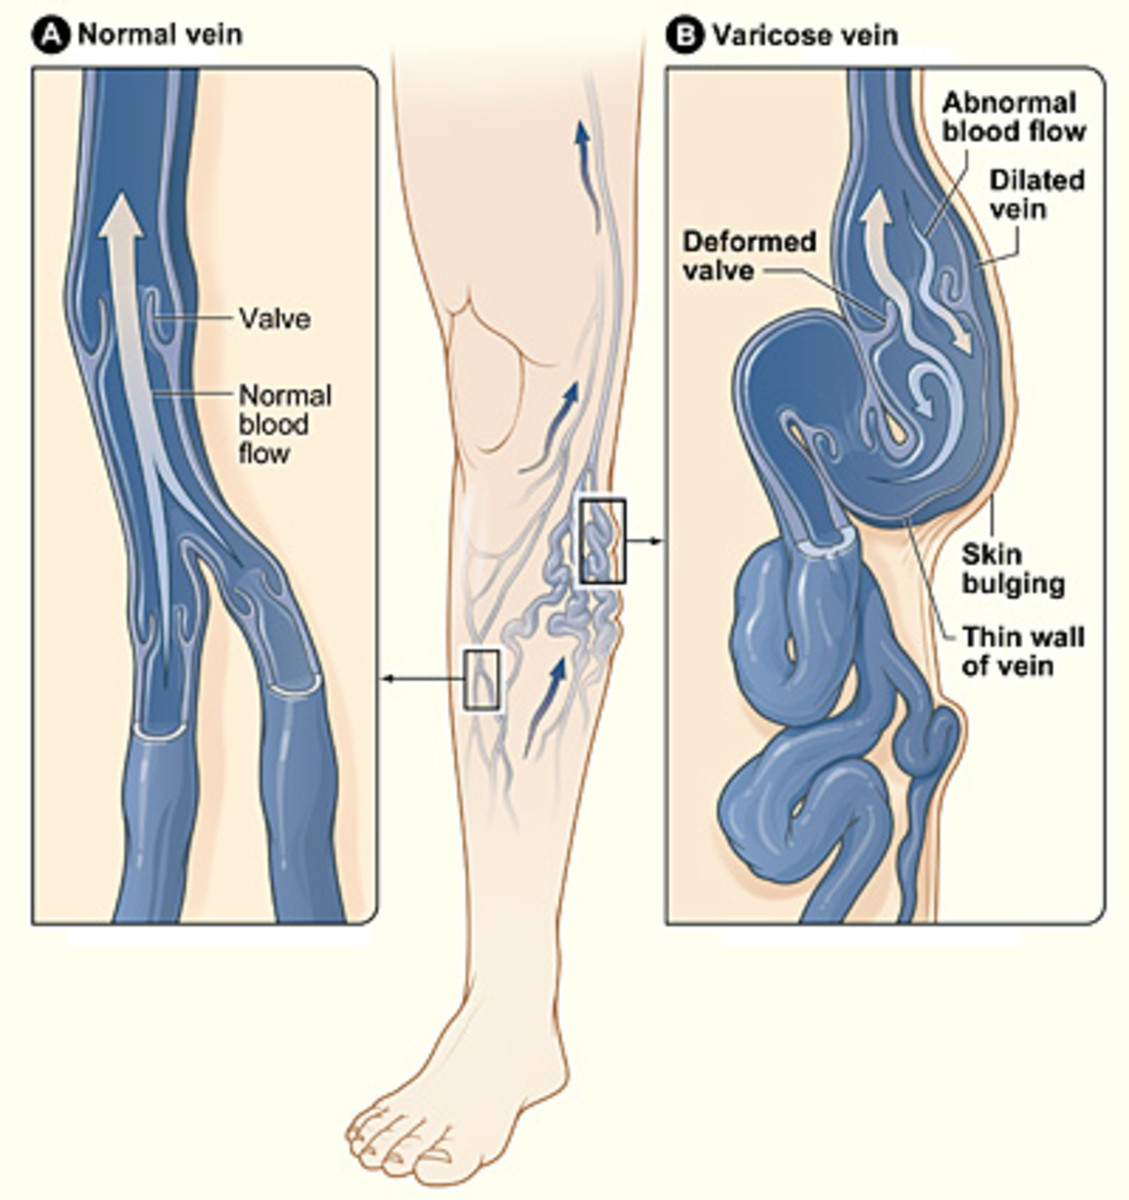 Varicose veins are painful and hamper blood circulation. 